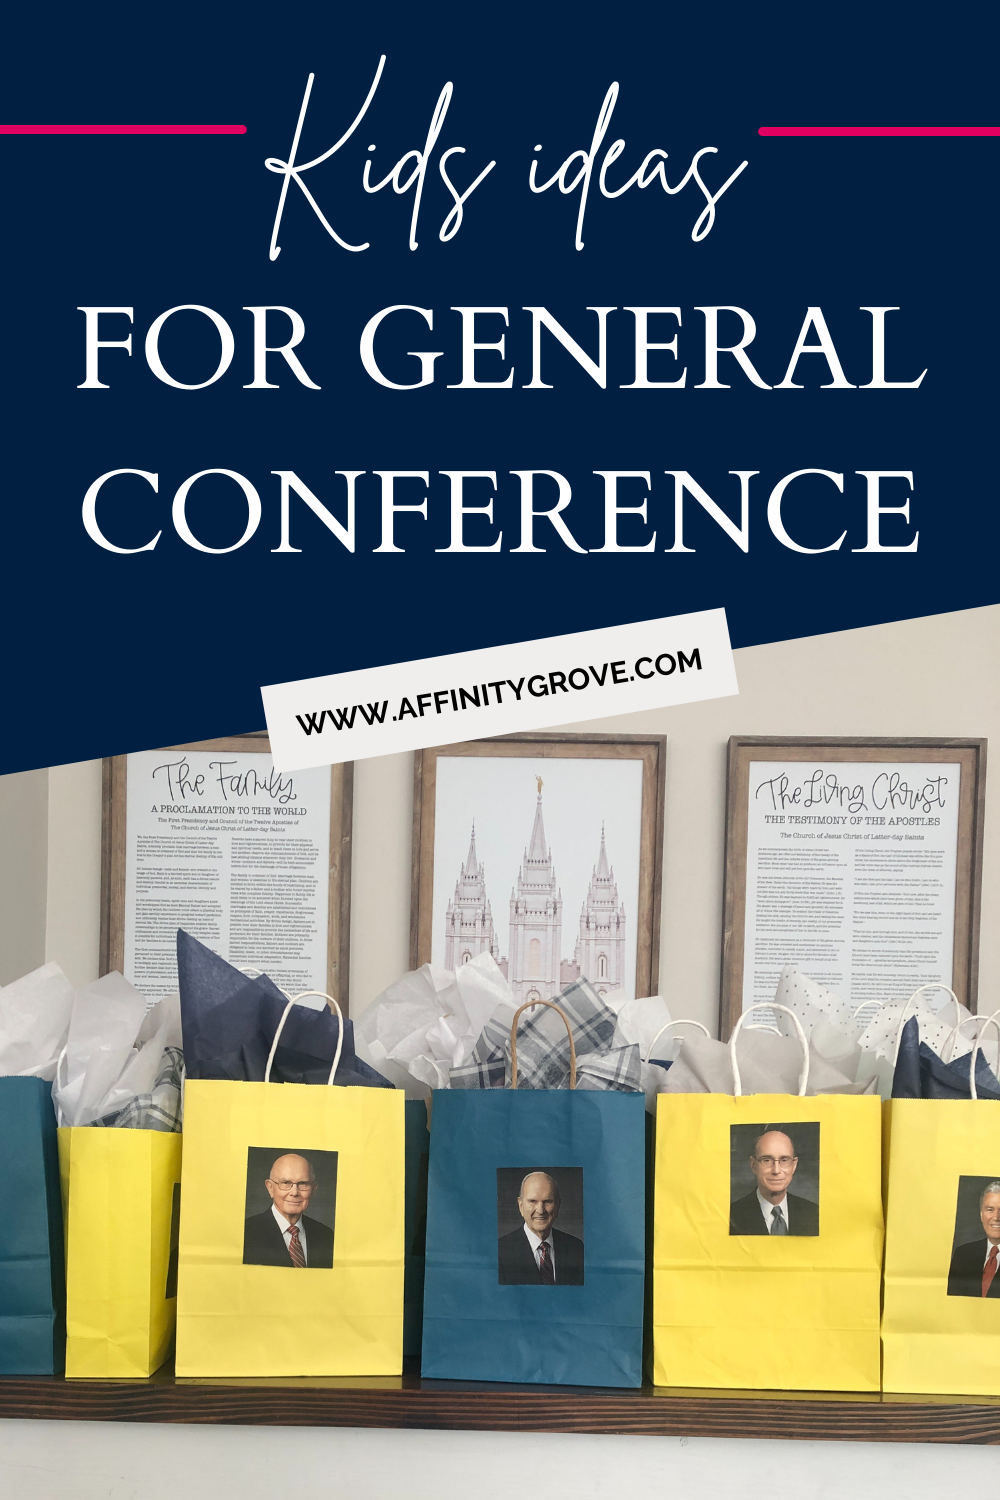 General Conference IDeas Pinterest